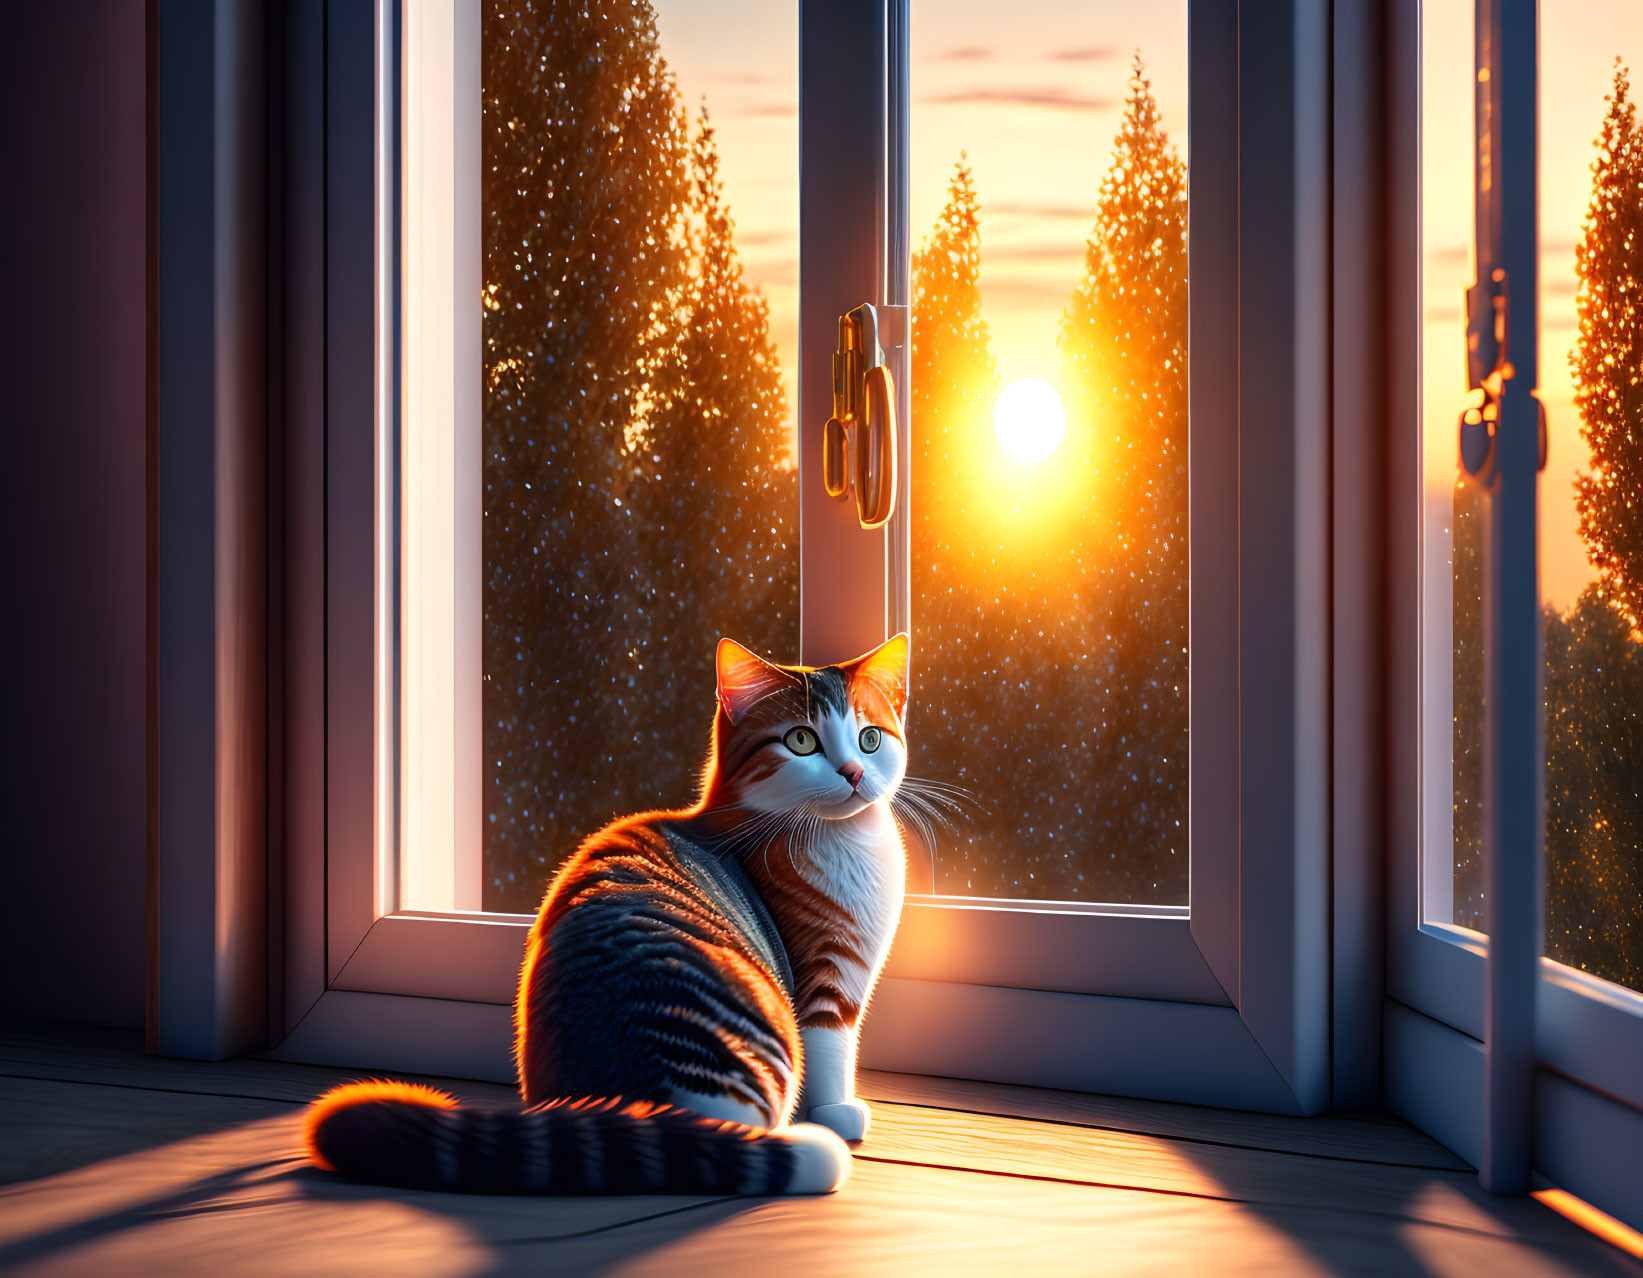 Cat by Window at Sunset Watching Orange Sky with Trees and Falling Snow